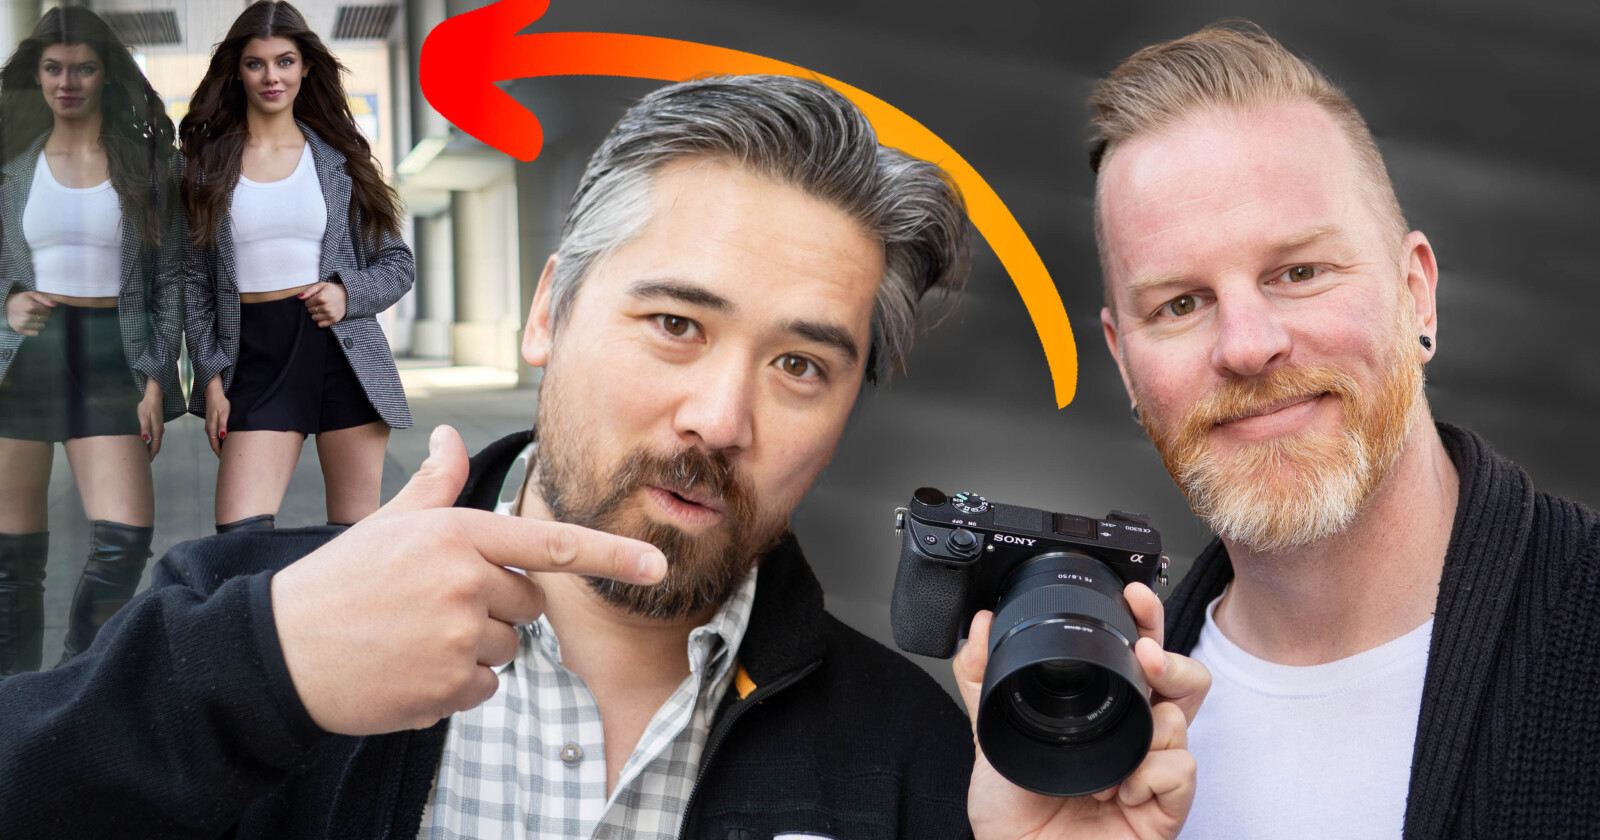 The Very Least You Need to Be a Pro Portrait Photographer